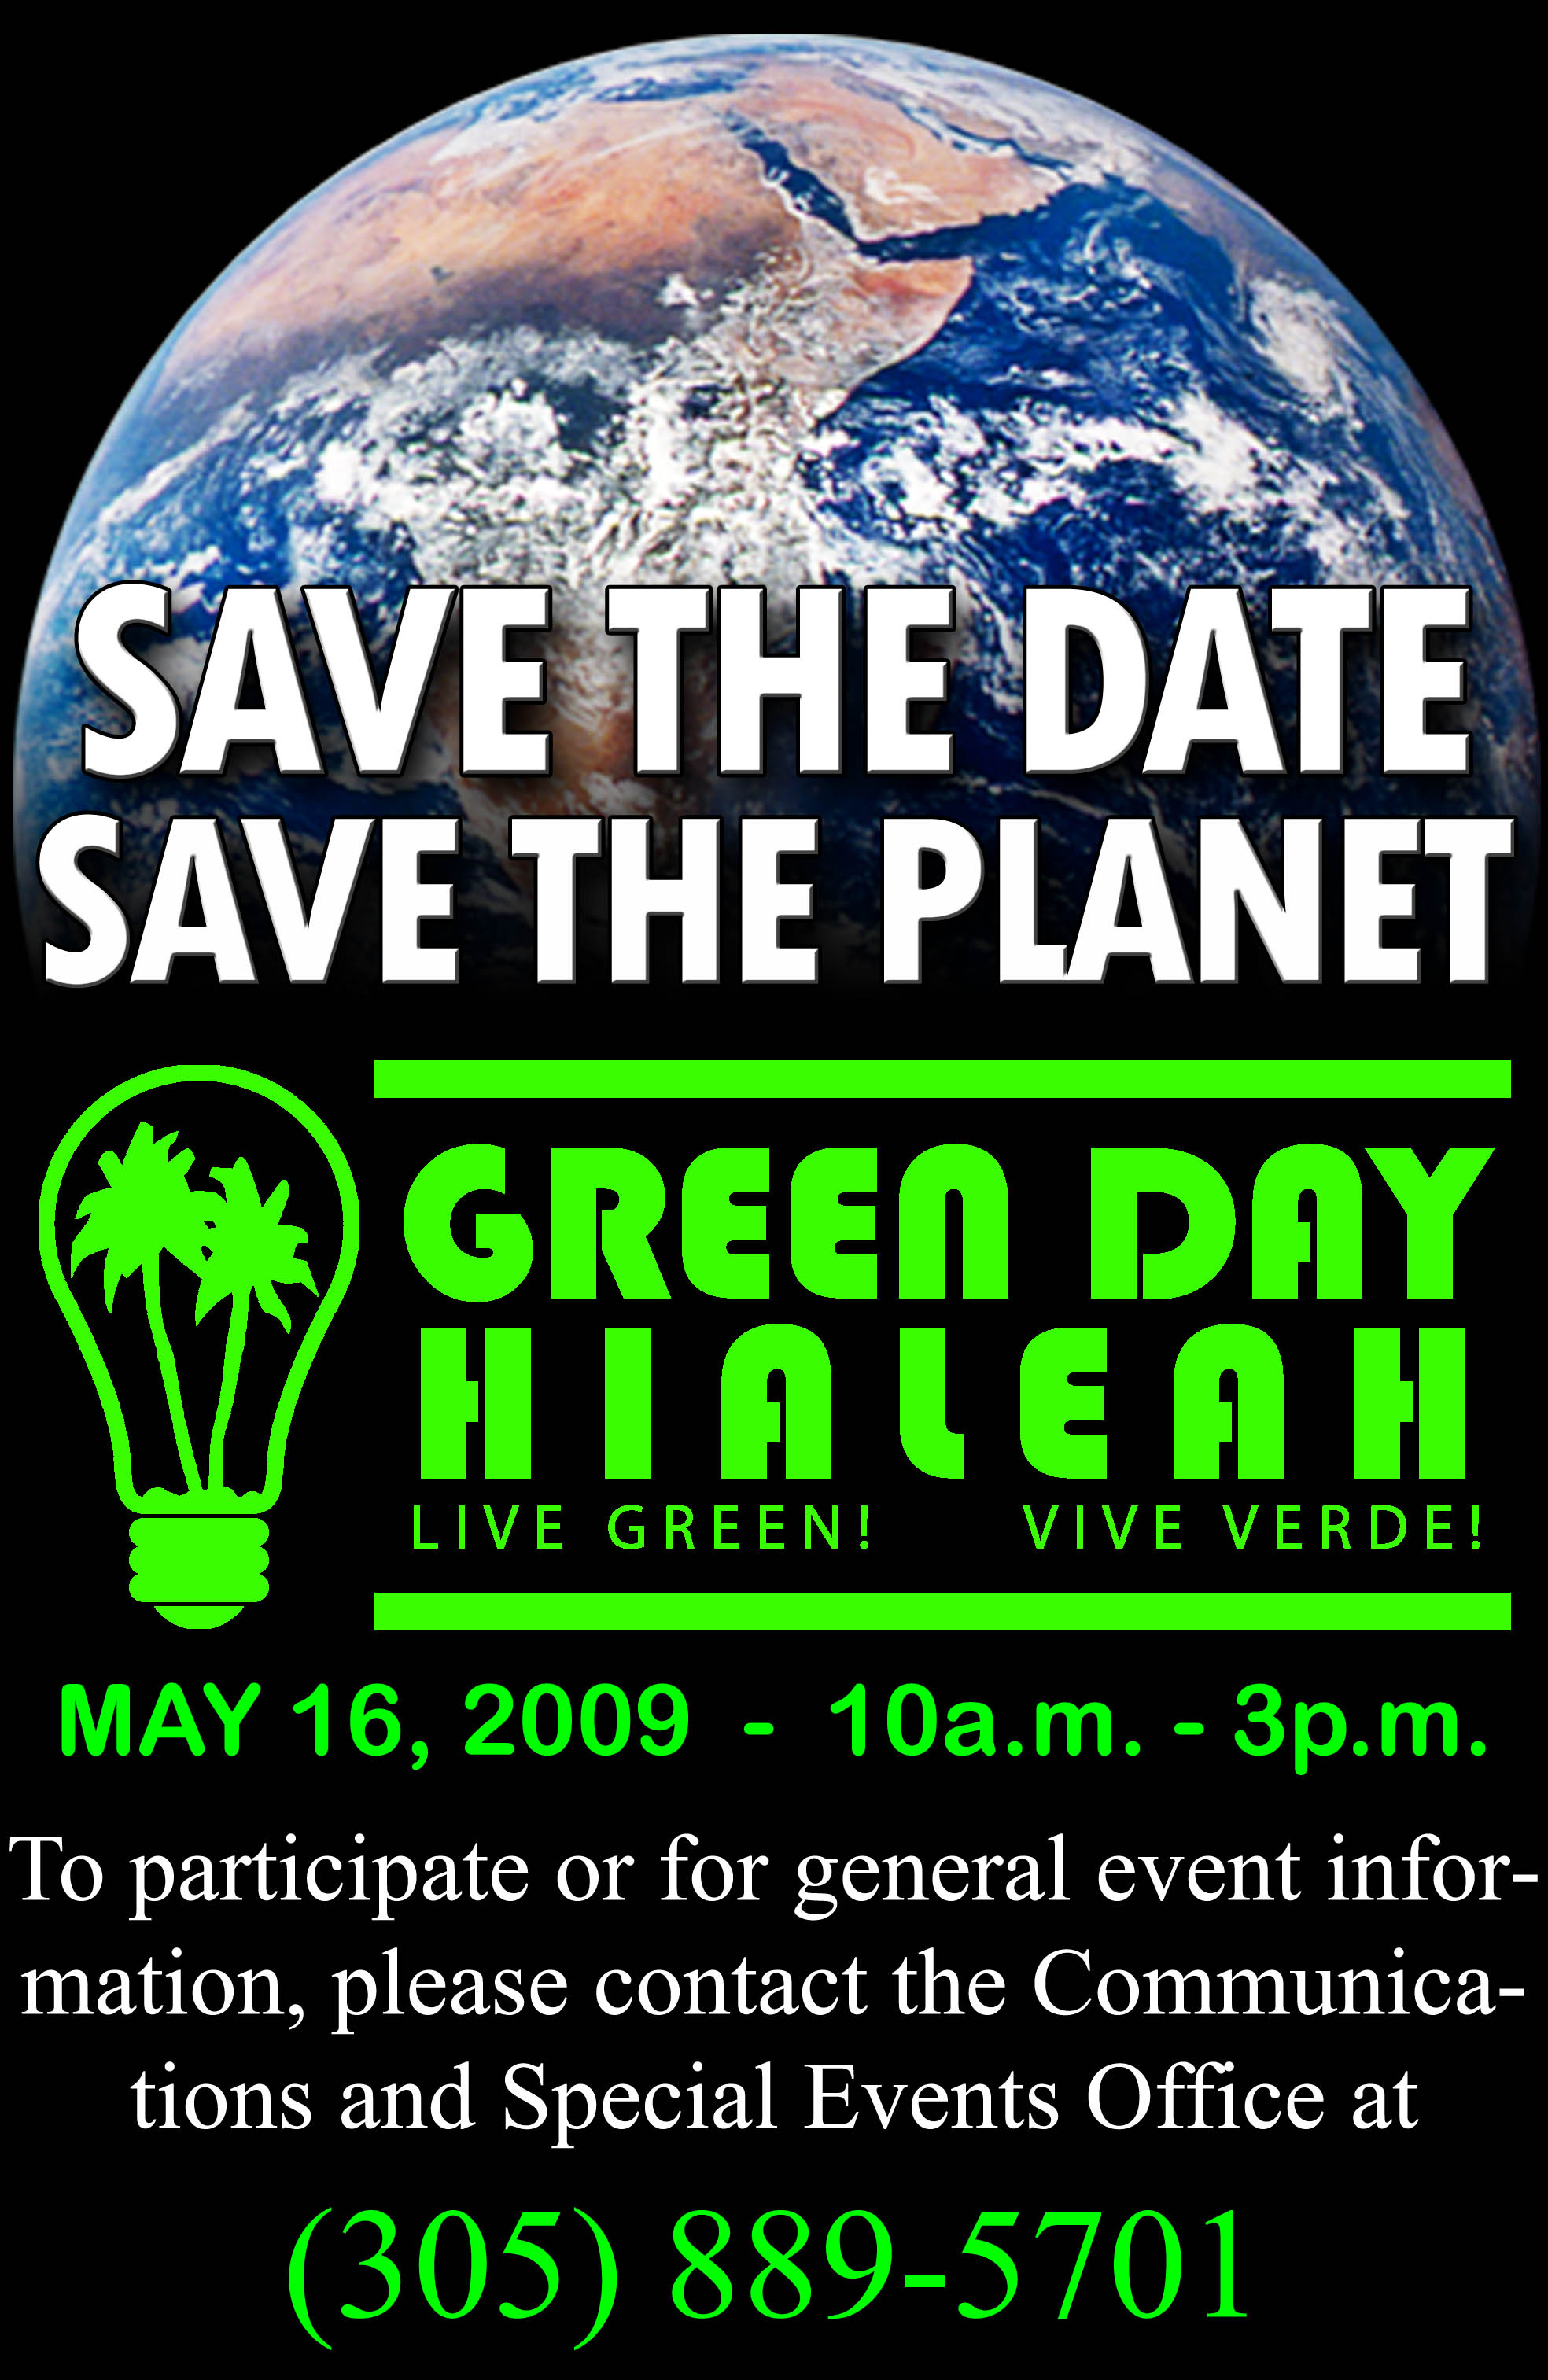 green-day-hialeah-save-the-date